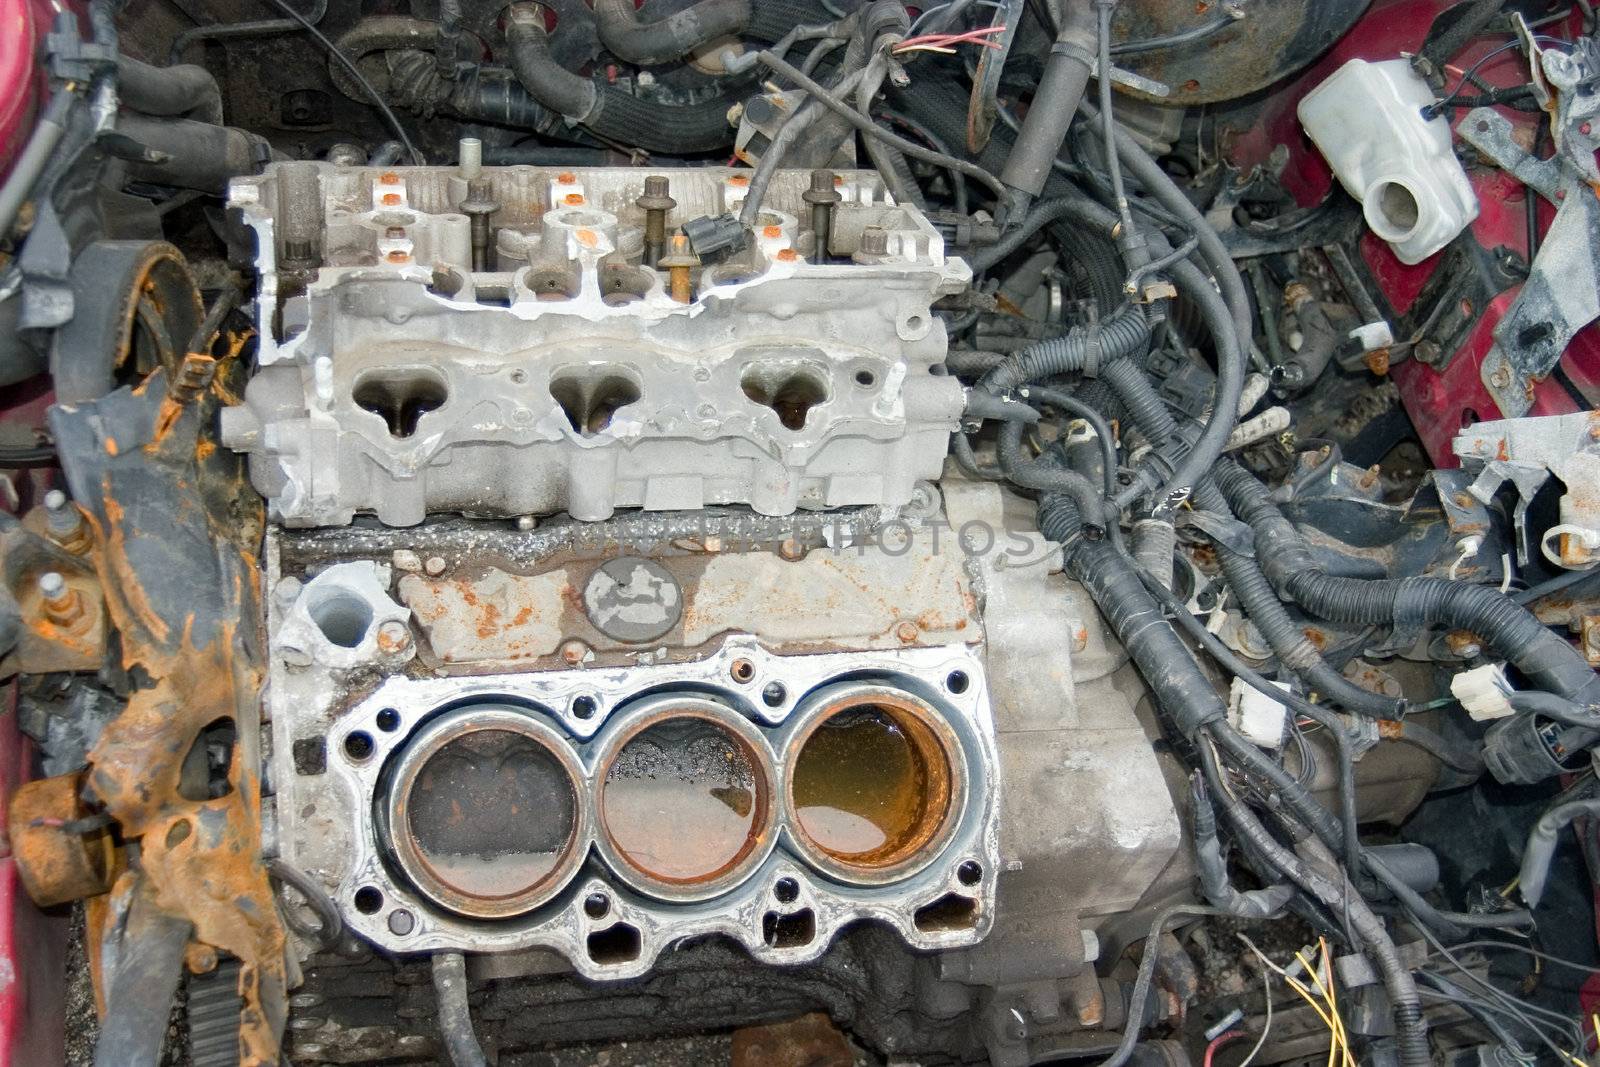 This is an engine block in a stolen sports car that has been stripped of all useable parts.